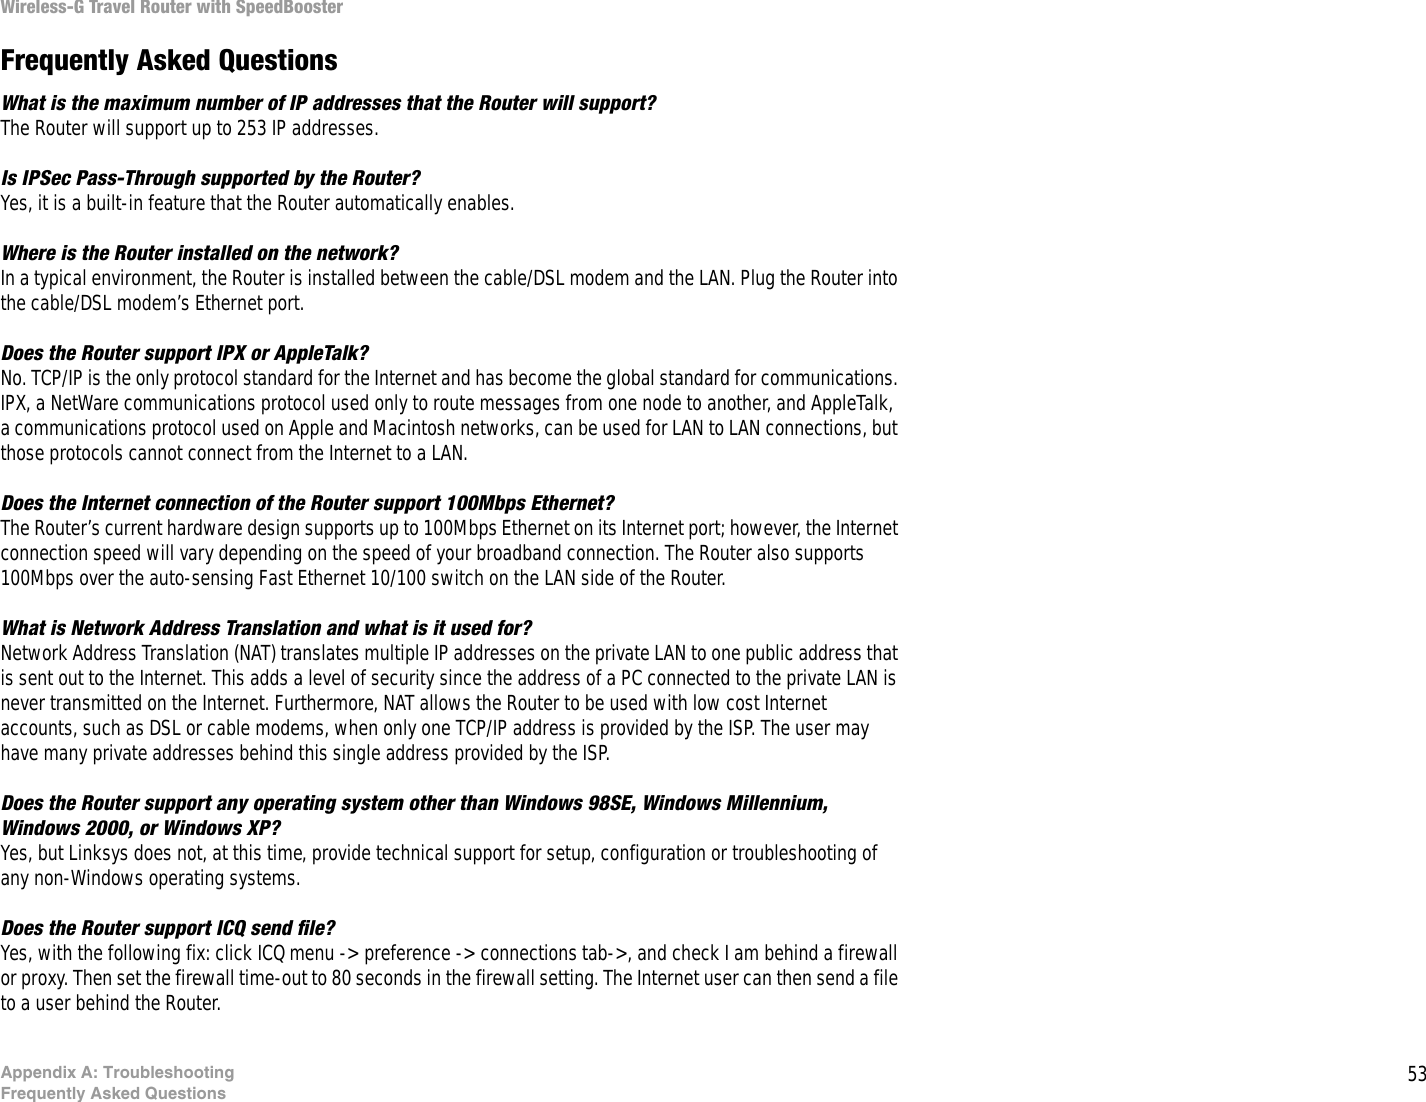 53Appendix A: TroubleshootingFrequently Asked QuestionsWireless-G Travel Router with SpeedBoosterFrequently Asked QuestionsWhat is the maximum number of IP addresses that the Router will support? The Router will support up to 253 IP addresses.Is IPSec Pass-Through supported by the Router? Yes, it is a built-in feature that the Router automatically enables.Where is the Router installed on the network? In a typical environment, the Router is installed between the cable/DSL modem and the LAN. Plug the Router into the cable/DSL modem’s Ethernet port.Does the Router support IPX or AppleTalk? No. TCP/IP is the only protocol standard for the Internet and has become the global standard for communications. IPX, a NetWare communications protocol used only to route messages from one node to another, and AppleTalk, a communications protocol used on Apple and Macintosh networks, can be used for LAN to LAN connections, but those protocols cannot connect from the Internet to a LAN.Does the Internet connection of the Router support 100Mbps Ethernet? The Router’s current hardware design supports up to 100Mbps Ethernet on its Internet port; however, the Internet connection speed will vary depending on the speed of your broadband connection. The Router also supports 100Mbps over the auto-sensing Fast Ethernet 10/100 switch on the LAN side of the Router. What is Network Address Translation and what is it used for? Network Address Translation (NAT) translates multiple IP addresses on the private LAN to one public address that is sent out to the Internet. This adds a level of security since the address of a PC connected to the private LAN is never transmitted on the Internet. Furthermore, NAT allows the Router to be used with low cost Internet accounts, such as DSL or cable modems, when only one TCP/IP address is provided by the ISP. The user may have many private addresses behind this single address provided by the ISP.Does the Router support any operating system other than Windows 98SE, Windows Millennium, Windows 2000, or Windows XP? Yes, but Linksys does not, at this time, provide technical support for setup, configuration or troubleshooting of any non-Windows operating systems.Does the Router support ICQ send file?  Yes, with the following fix: click ICQ menu -&gt; preference -&gt; connections tab-&gt;, and check I am behind a firewall or proxy. Then set the firewall time-out to 80 seconds in the firewall setting. The Internet user can then send a file to a user behind the Router.